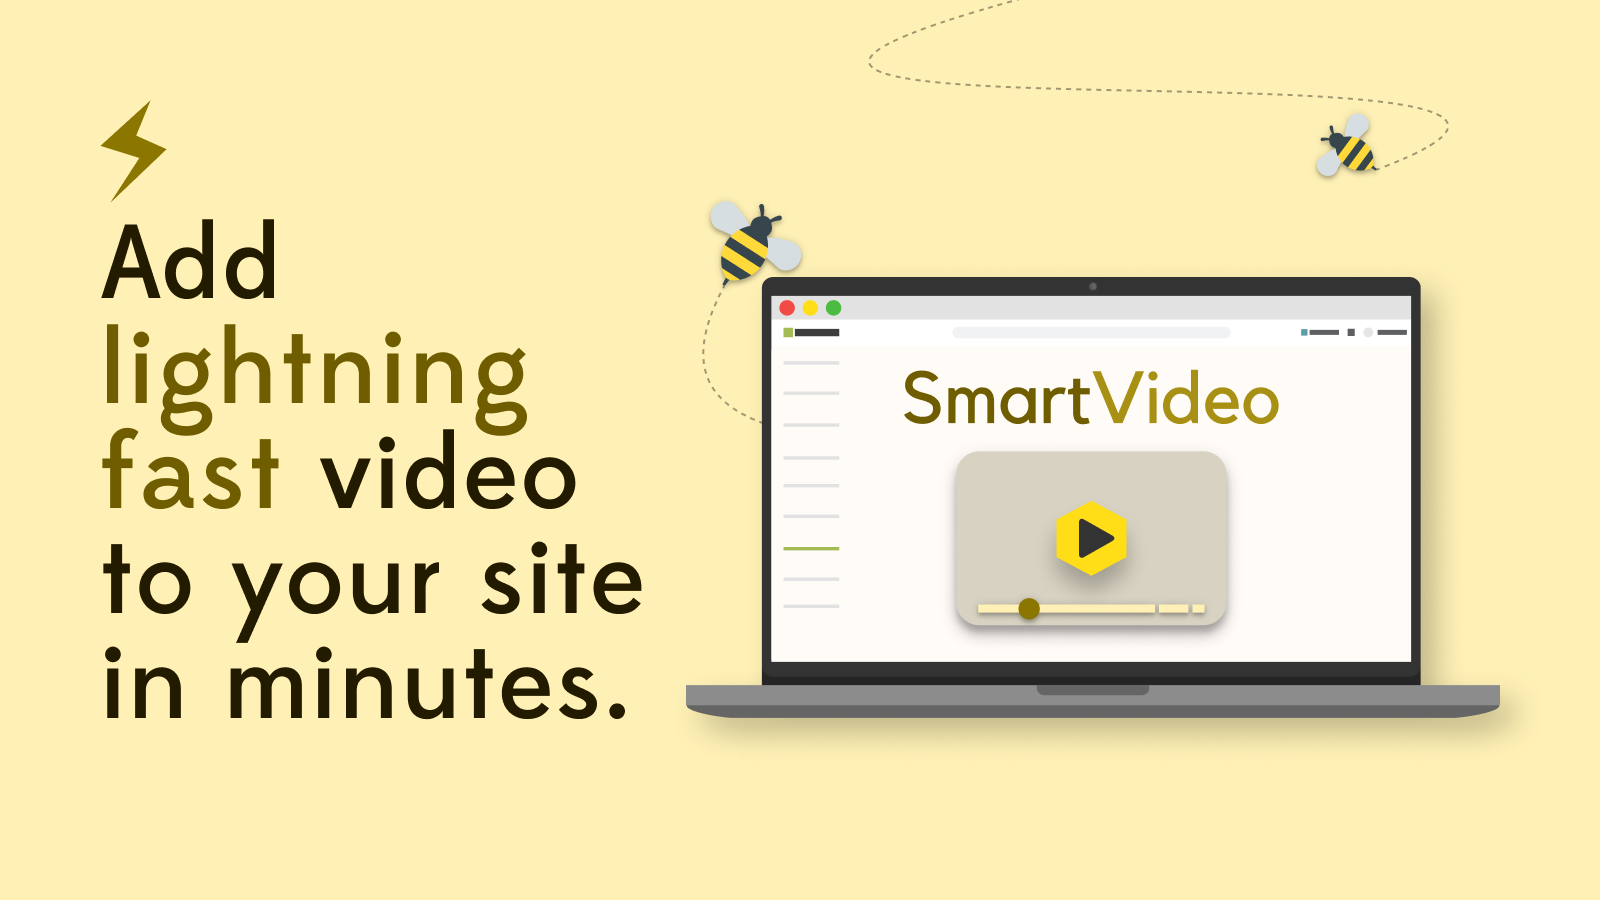 add lightning fast video to your site in minutes with SmartVideo